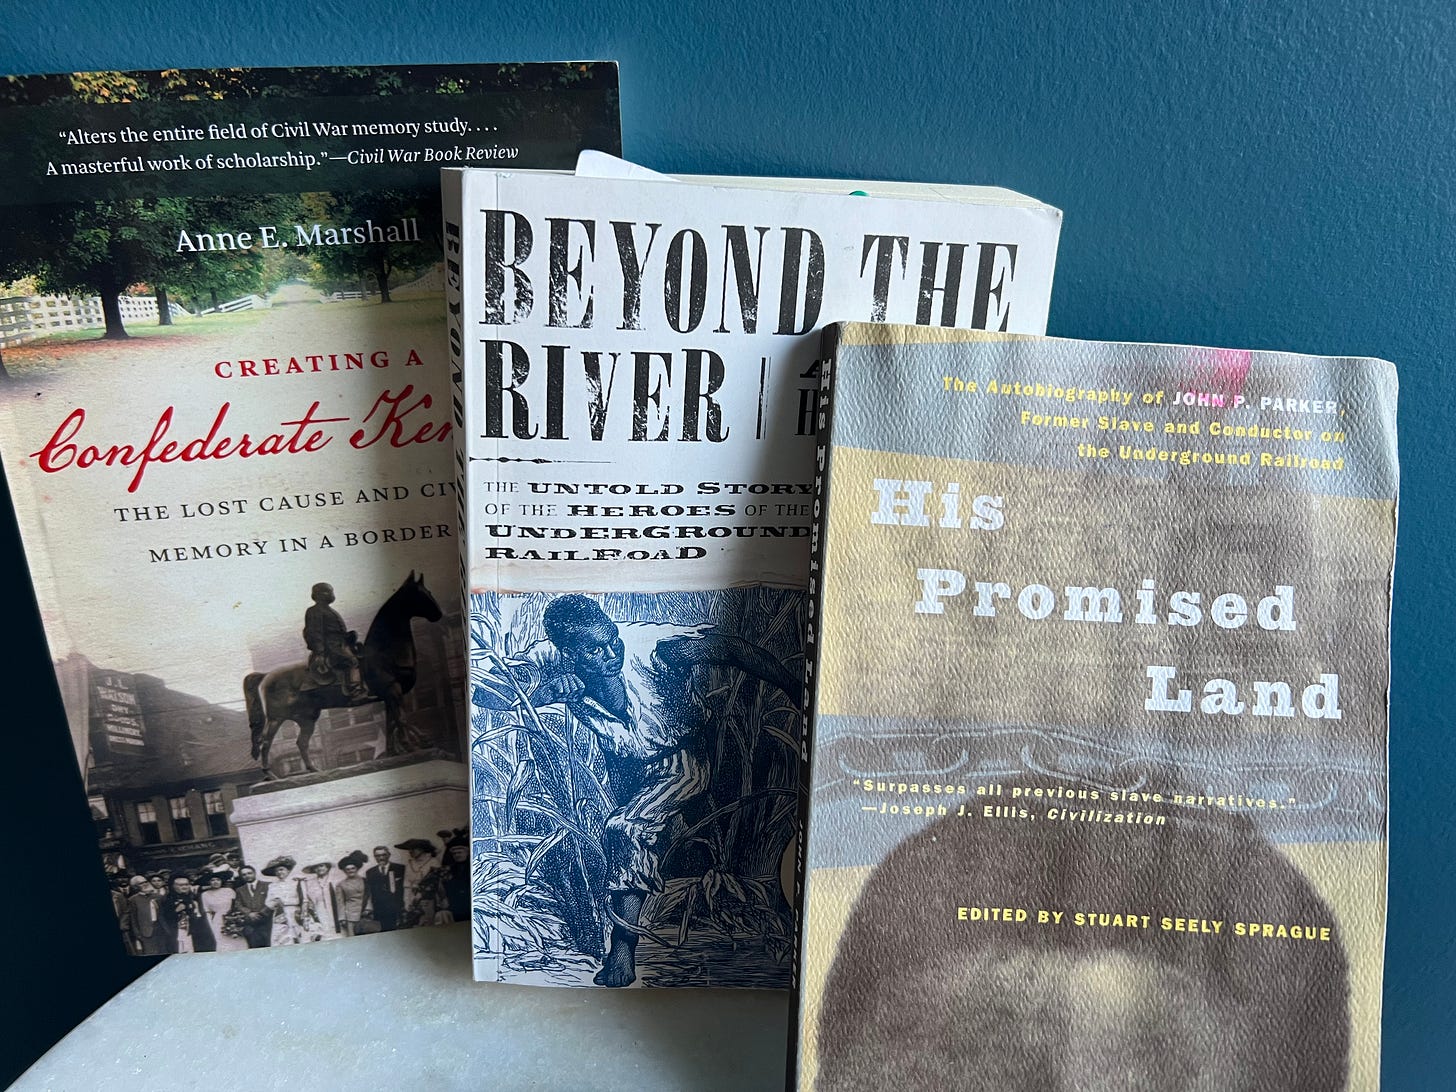 Three books against a blue background. "Creating a Confederate Kentucky," "Beyond the River," and "His Promised Land"